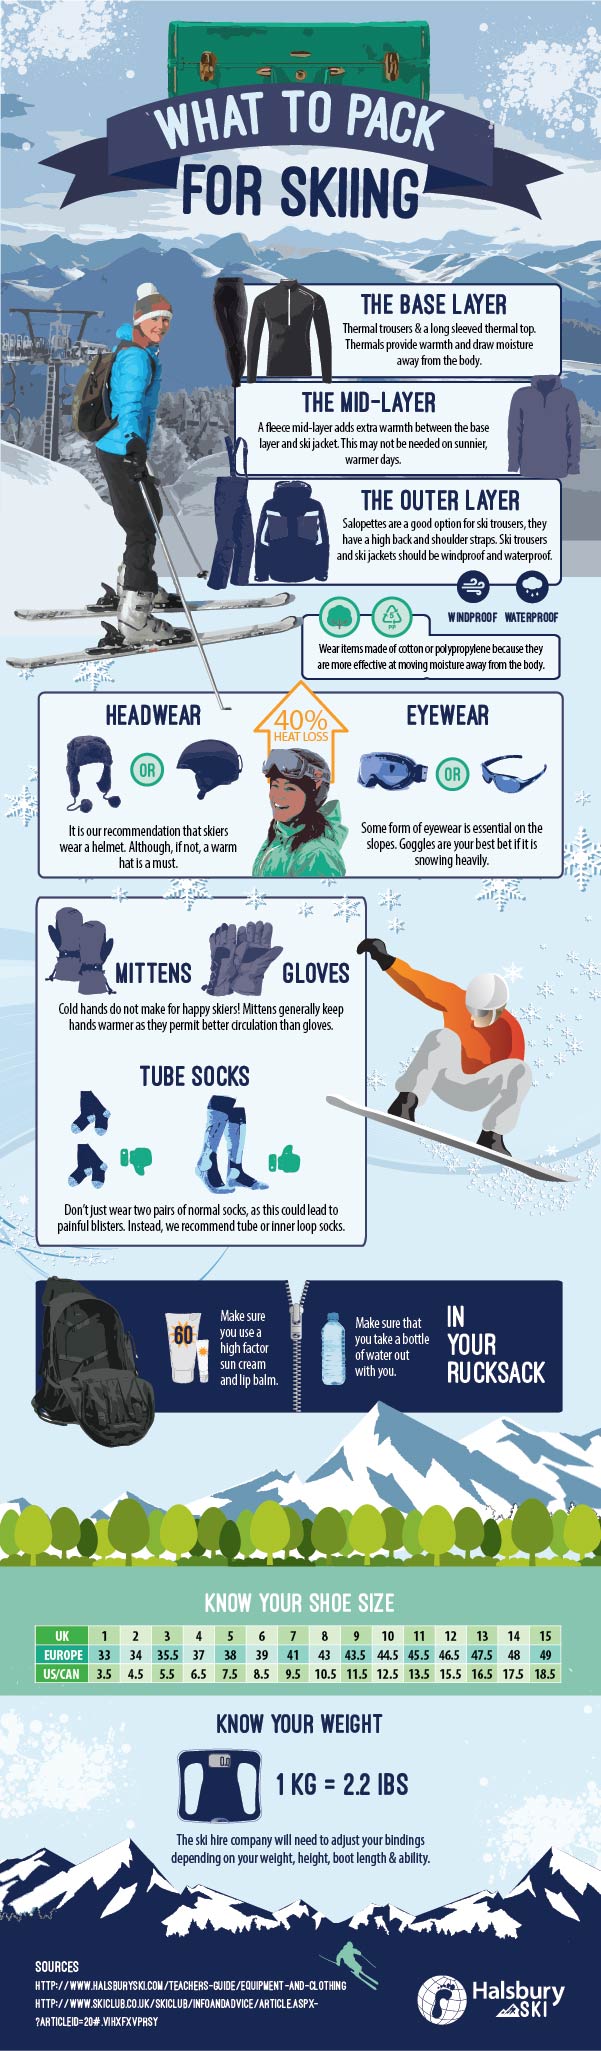 what to pack for skiing infographic